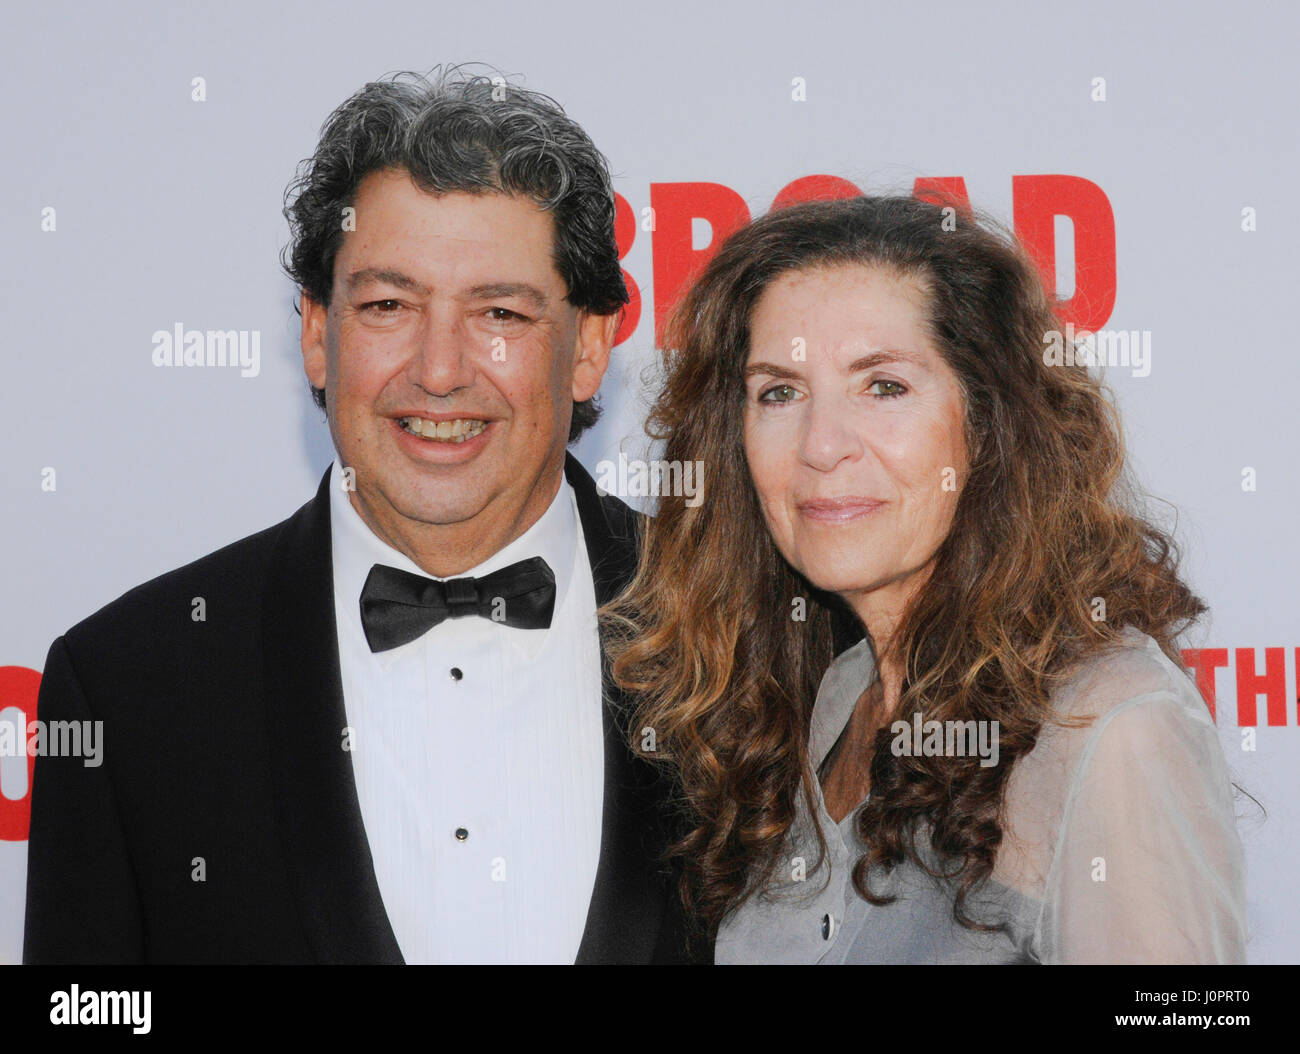 Paul Schimmel and Yvonne Schimmel attends the Broad Museum black tie inaugural dinner at The Broad on September 17th, 2015 in Los Angeles, California. Stock Photo